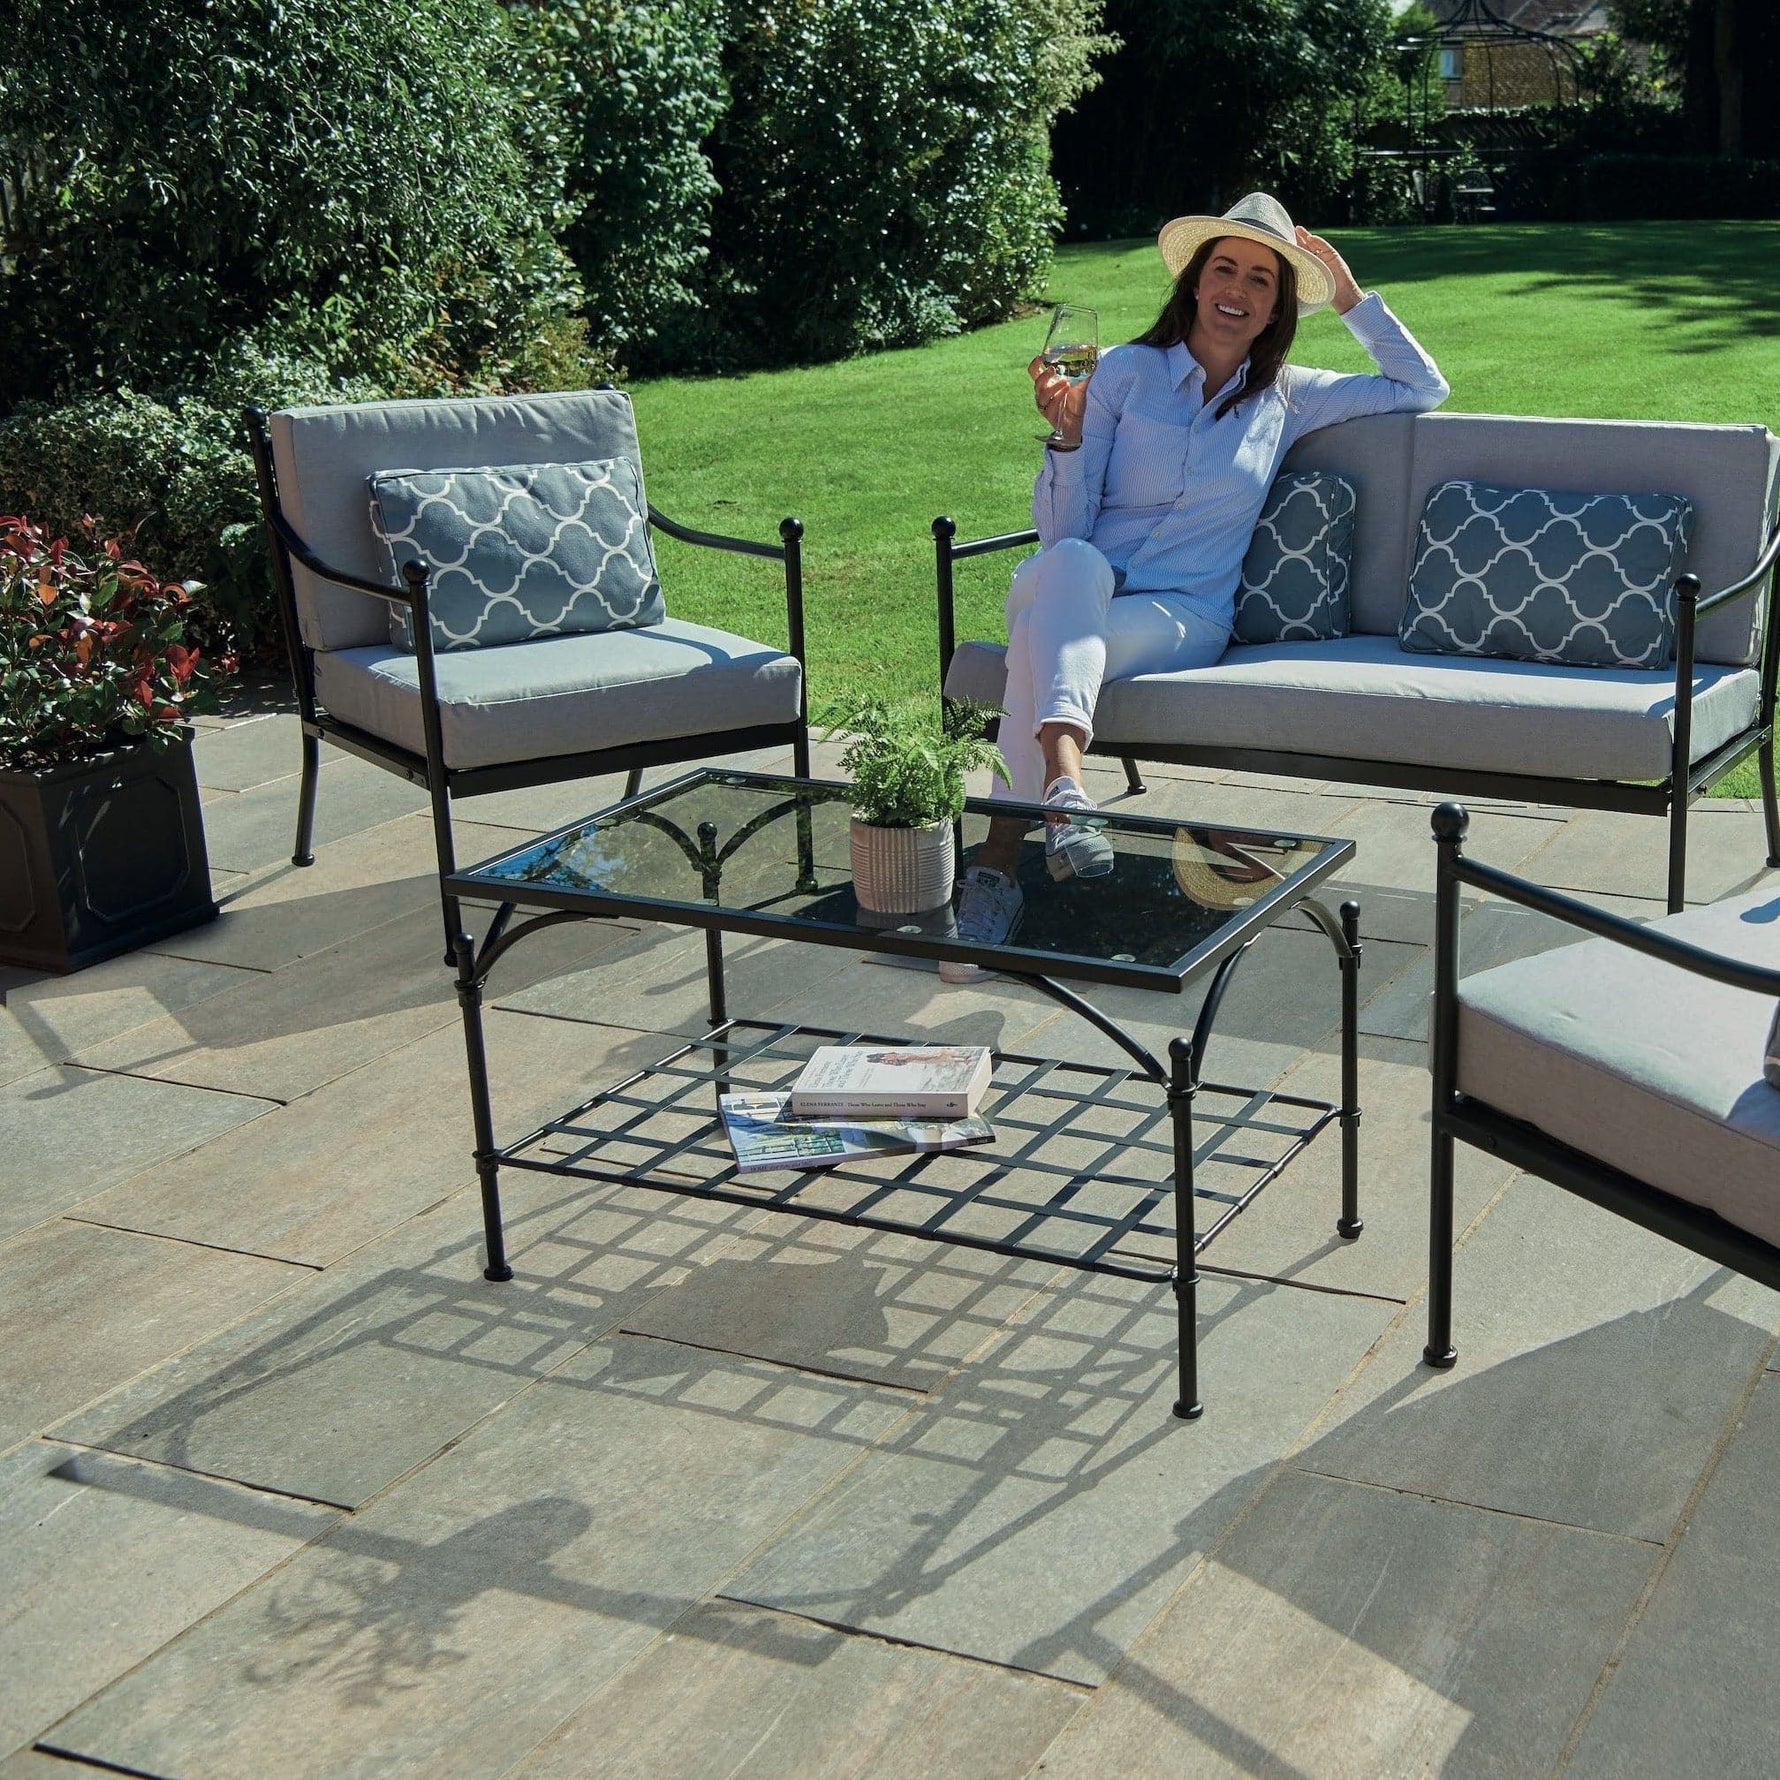 Steel Painted Outdoor/ Conservatory Sofa, armchairs & Table Set